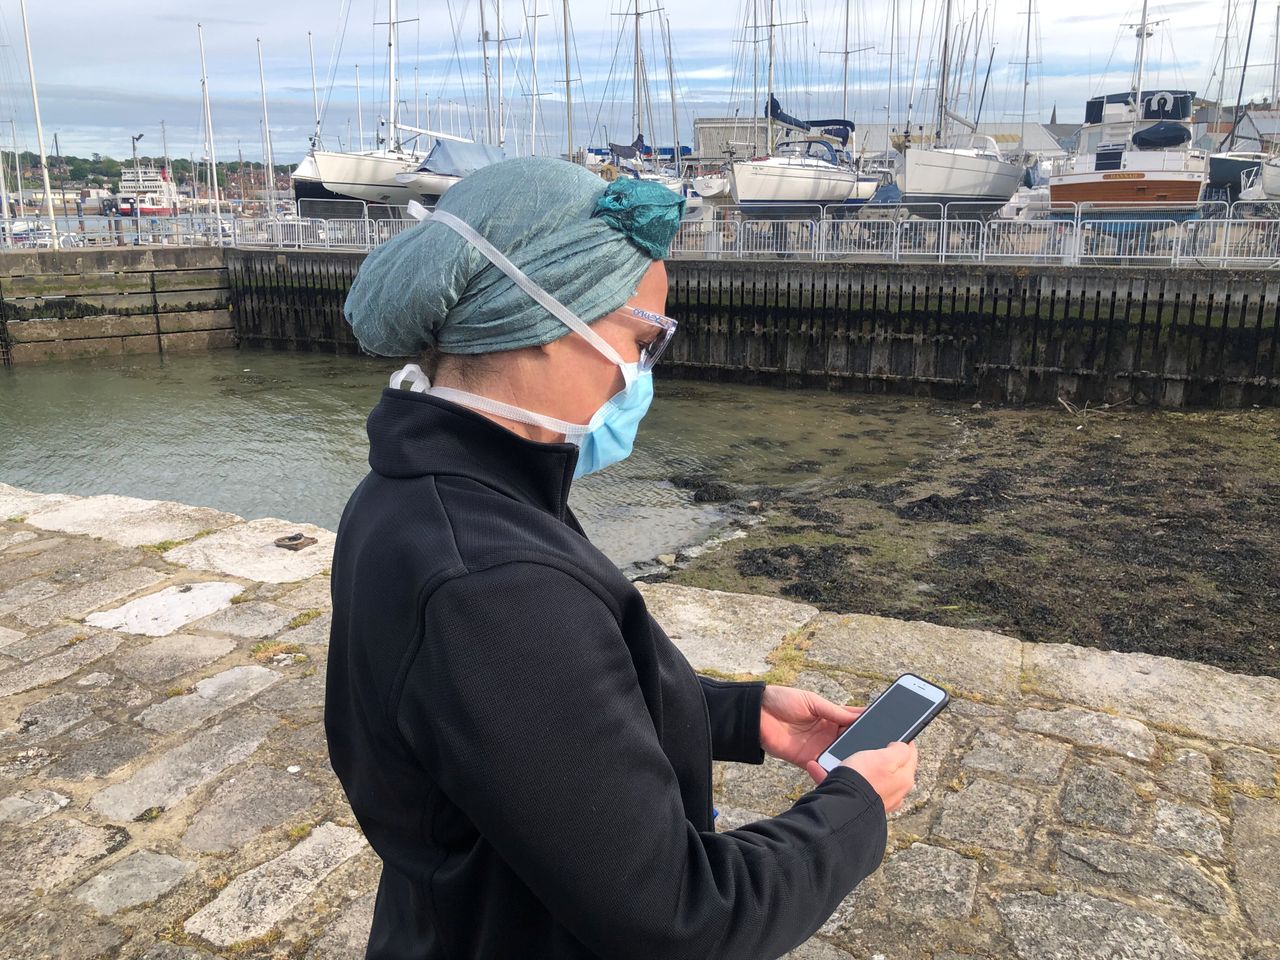 An NHS employee using the app to trace contacts with people potentially infected with the coronavirus disease on Isle of Wight last month.